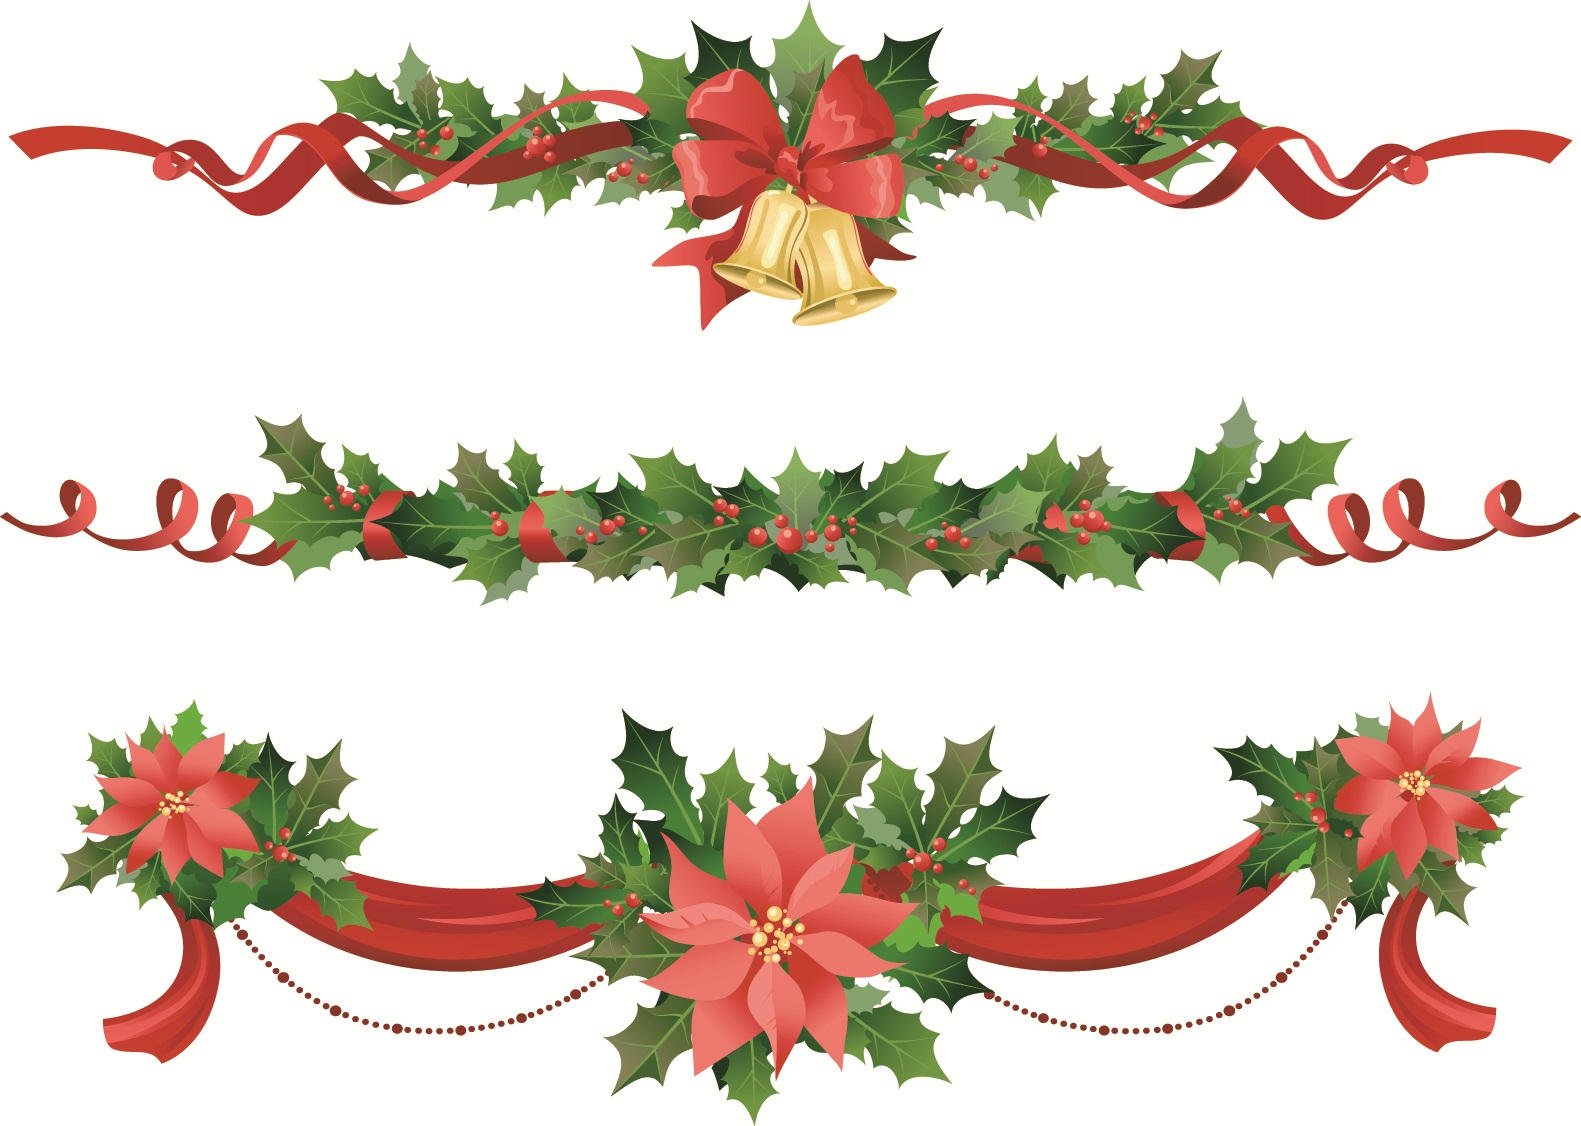 Christmas Decorations Vector Pack by Garcya on DeviantArt